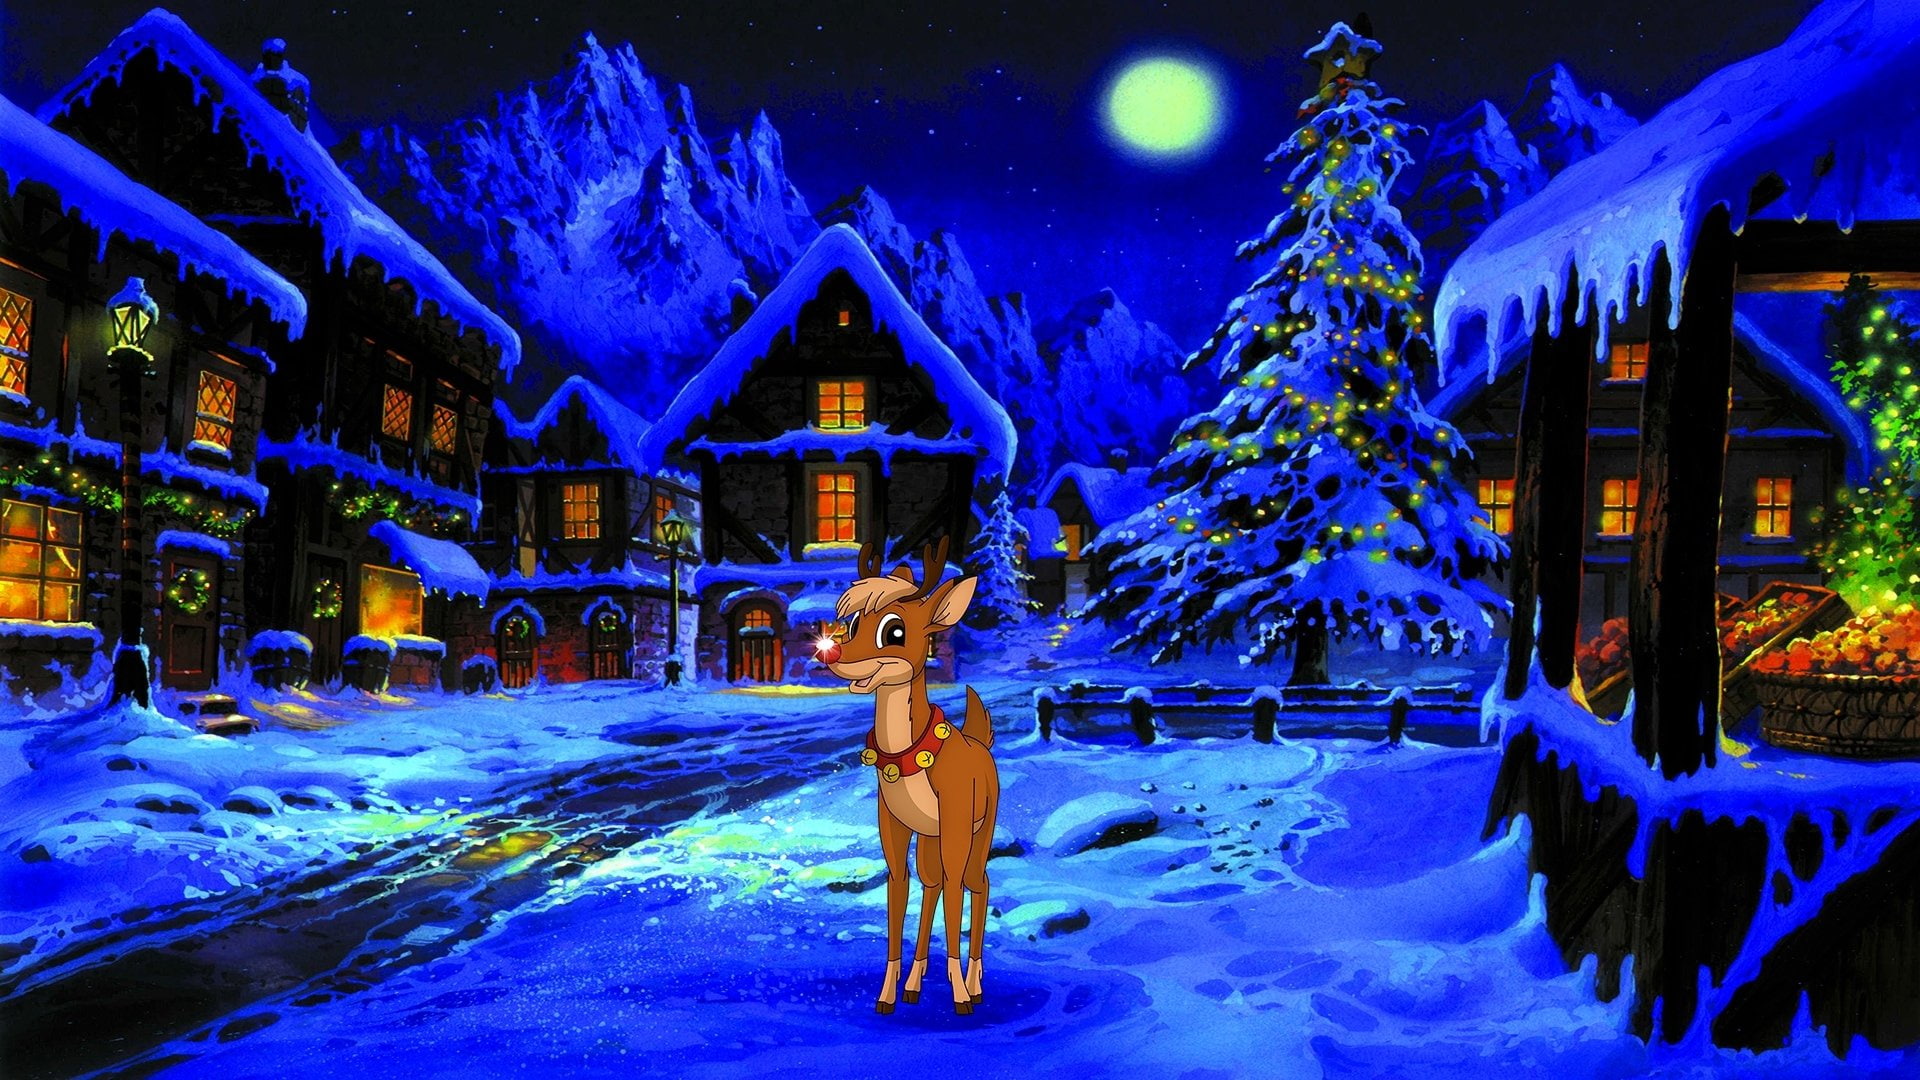 Movie, Rudolph the Red-Nosed Reindeer: The Movie